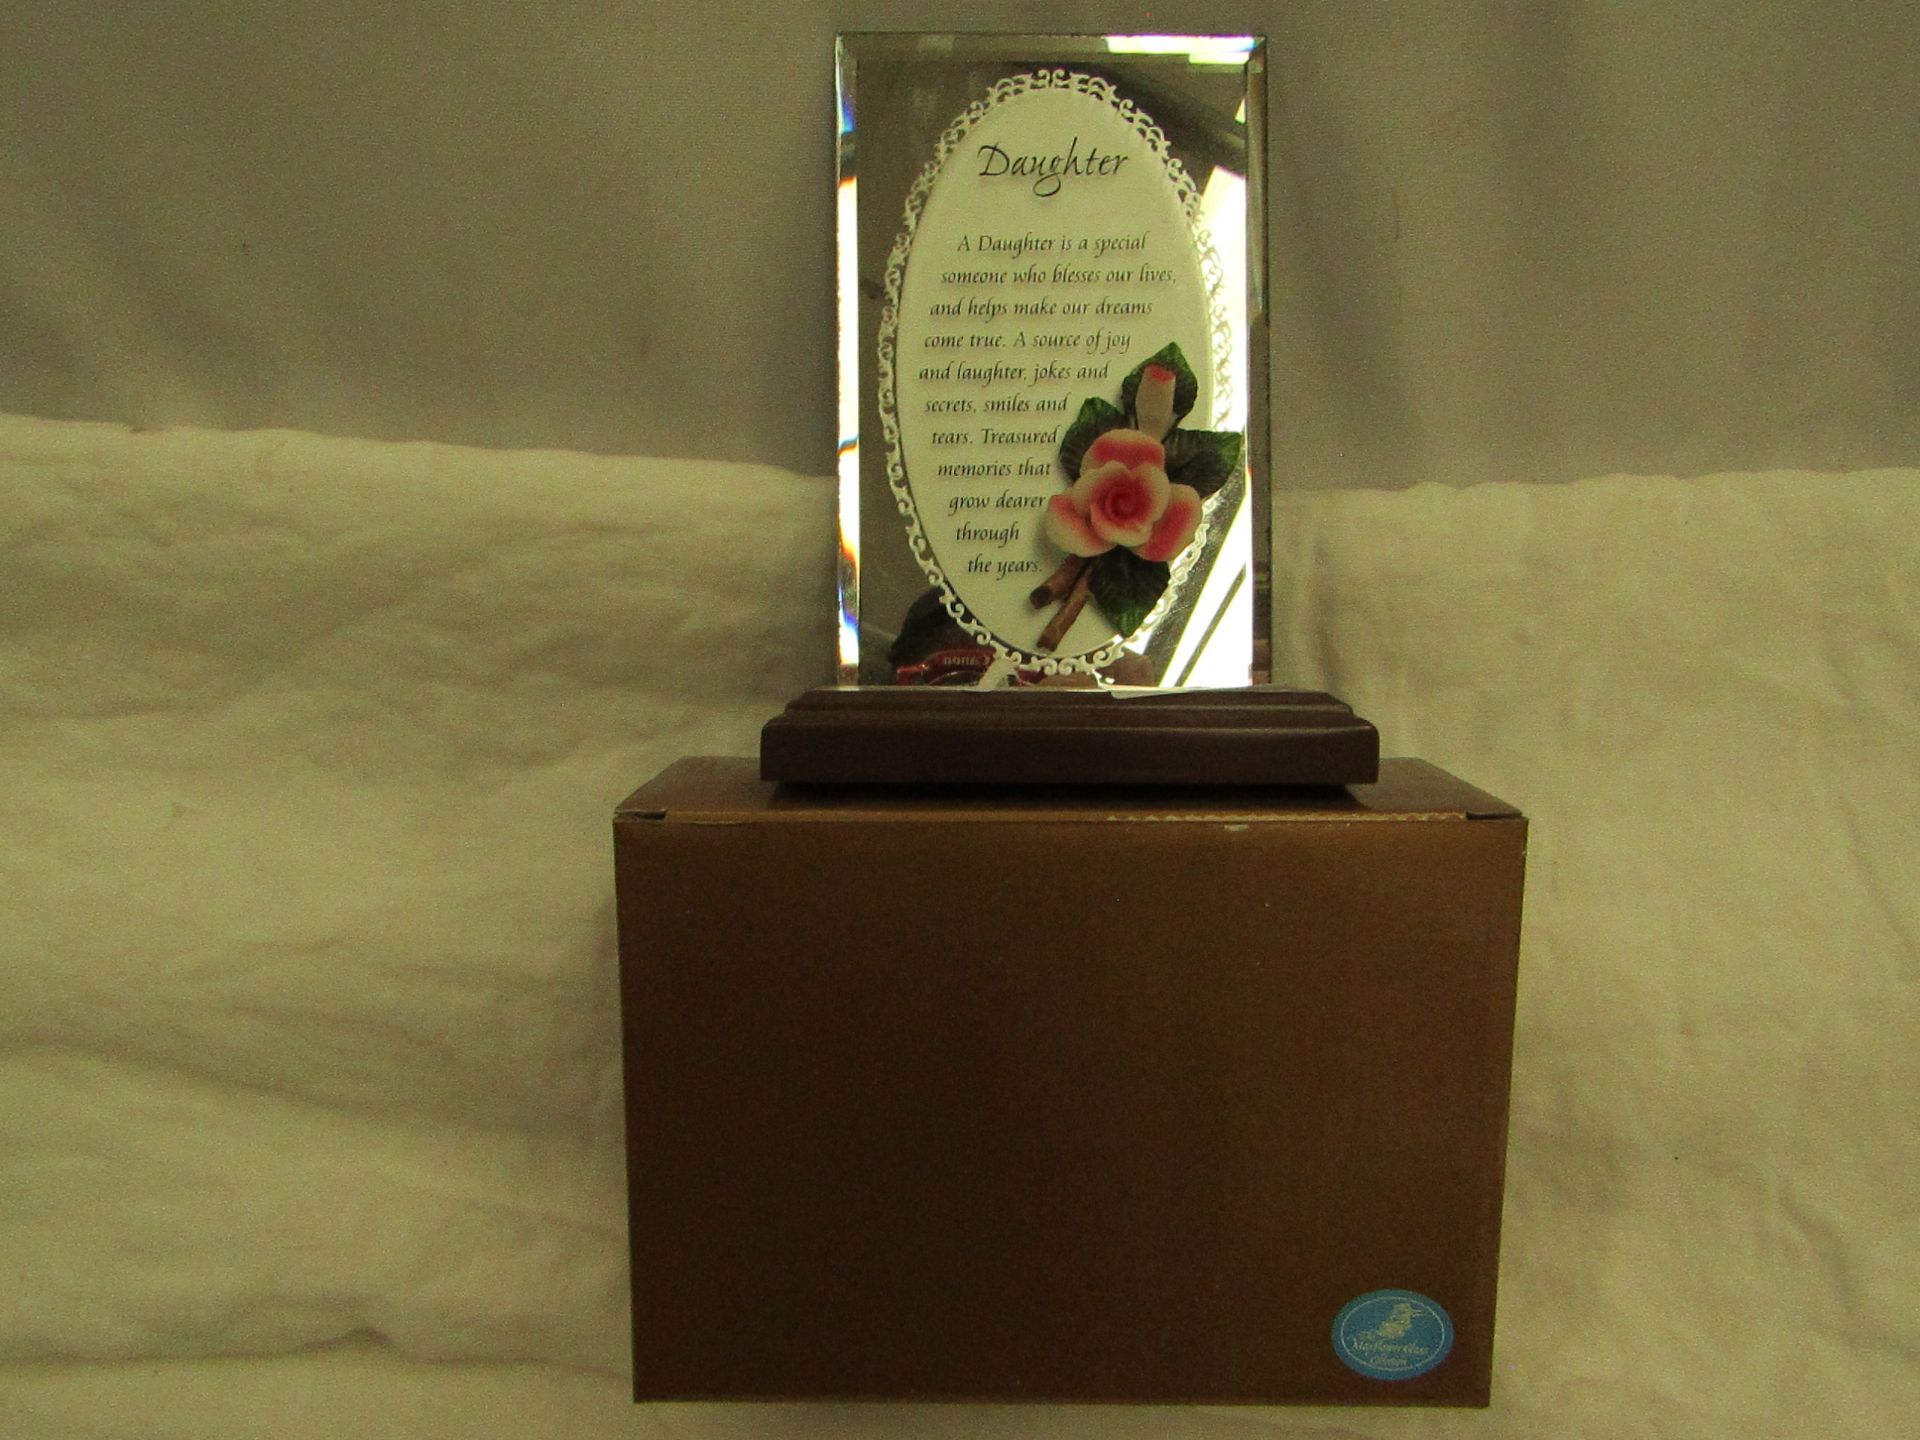 12x Mayflower Collectables - "Daughter" Glass Plaque Ornament - New & Boxed.